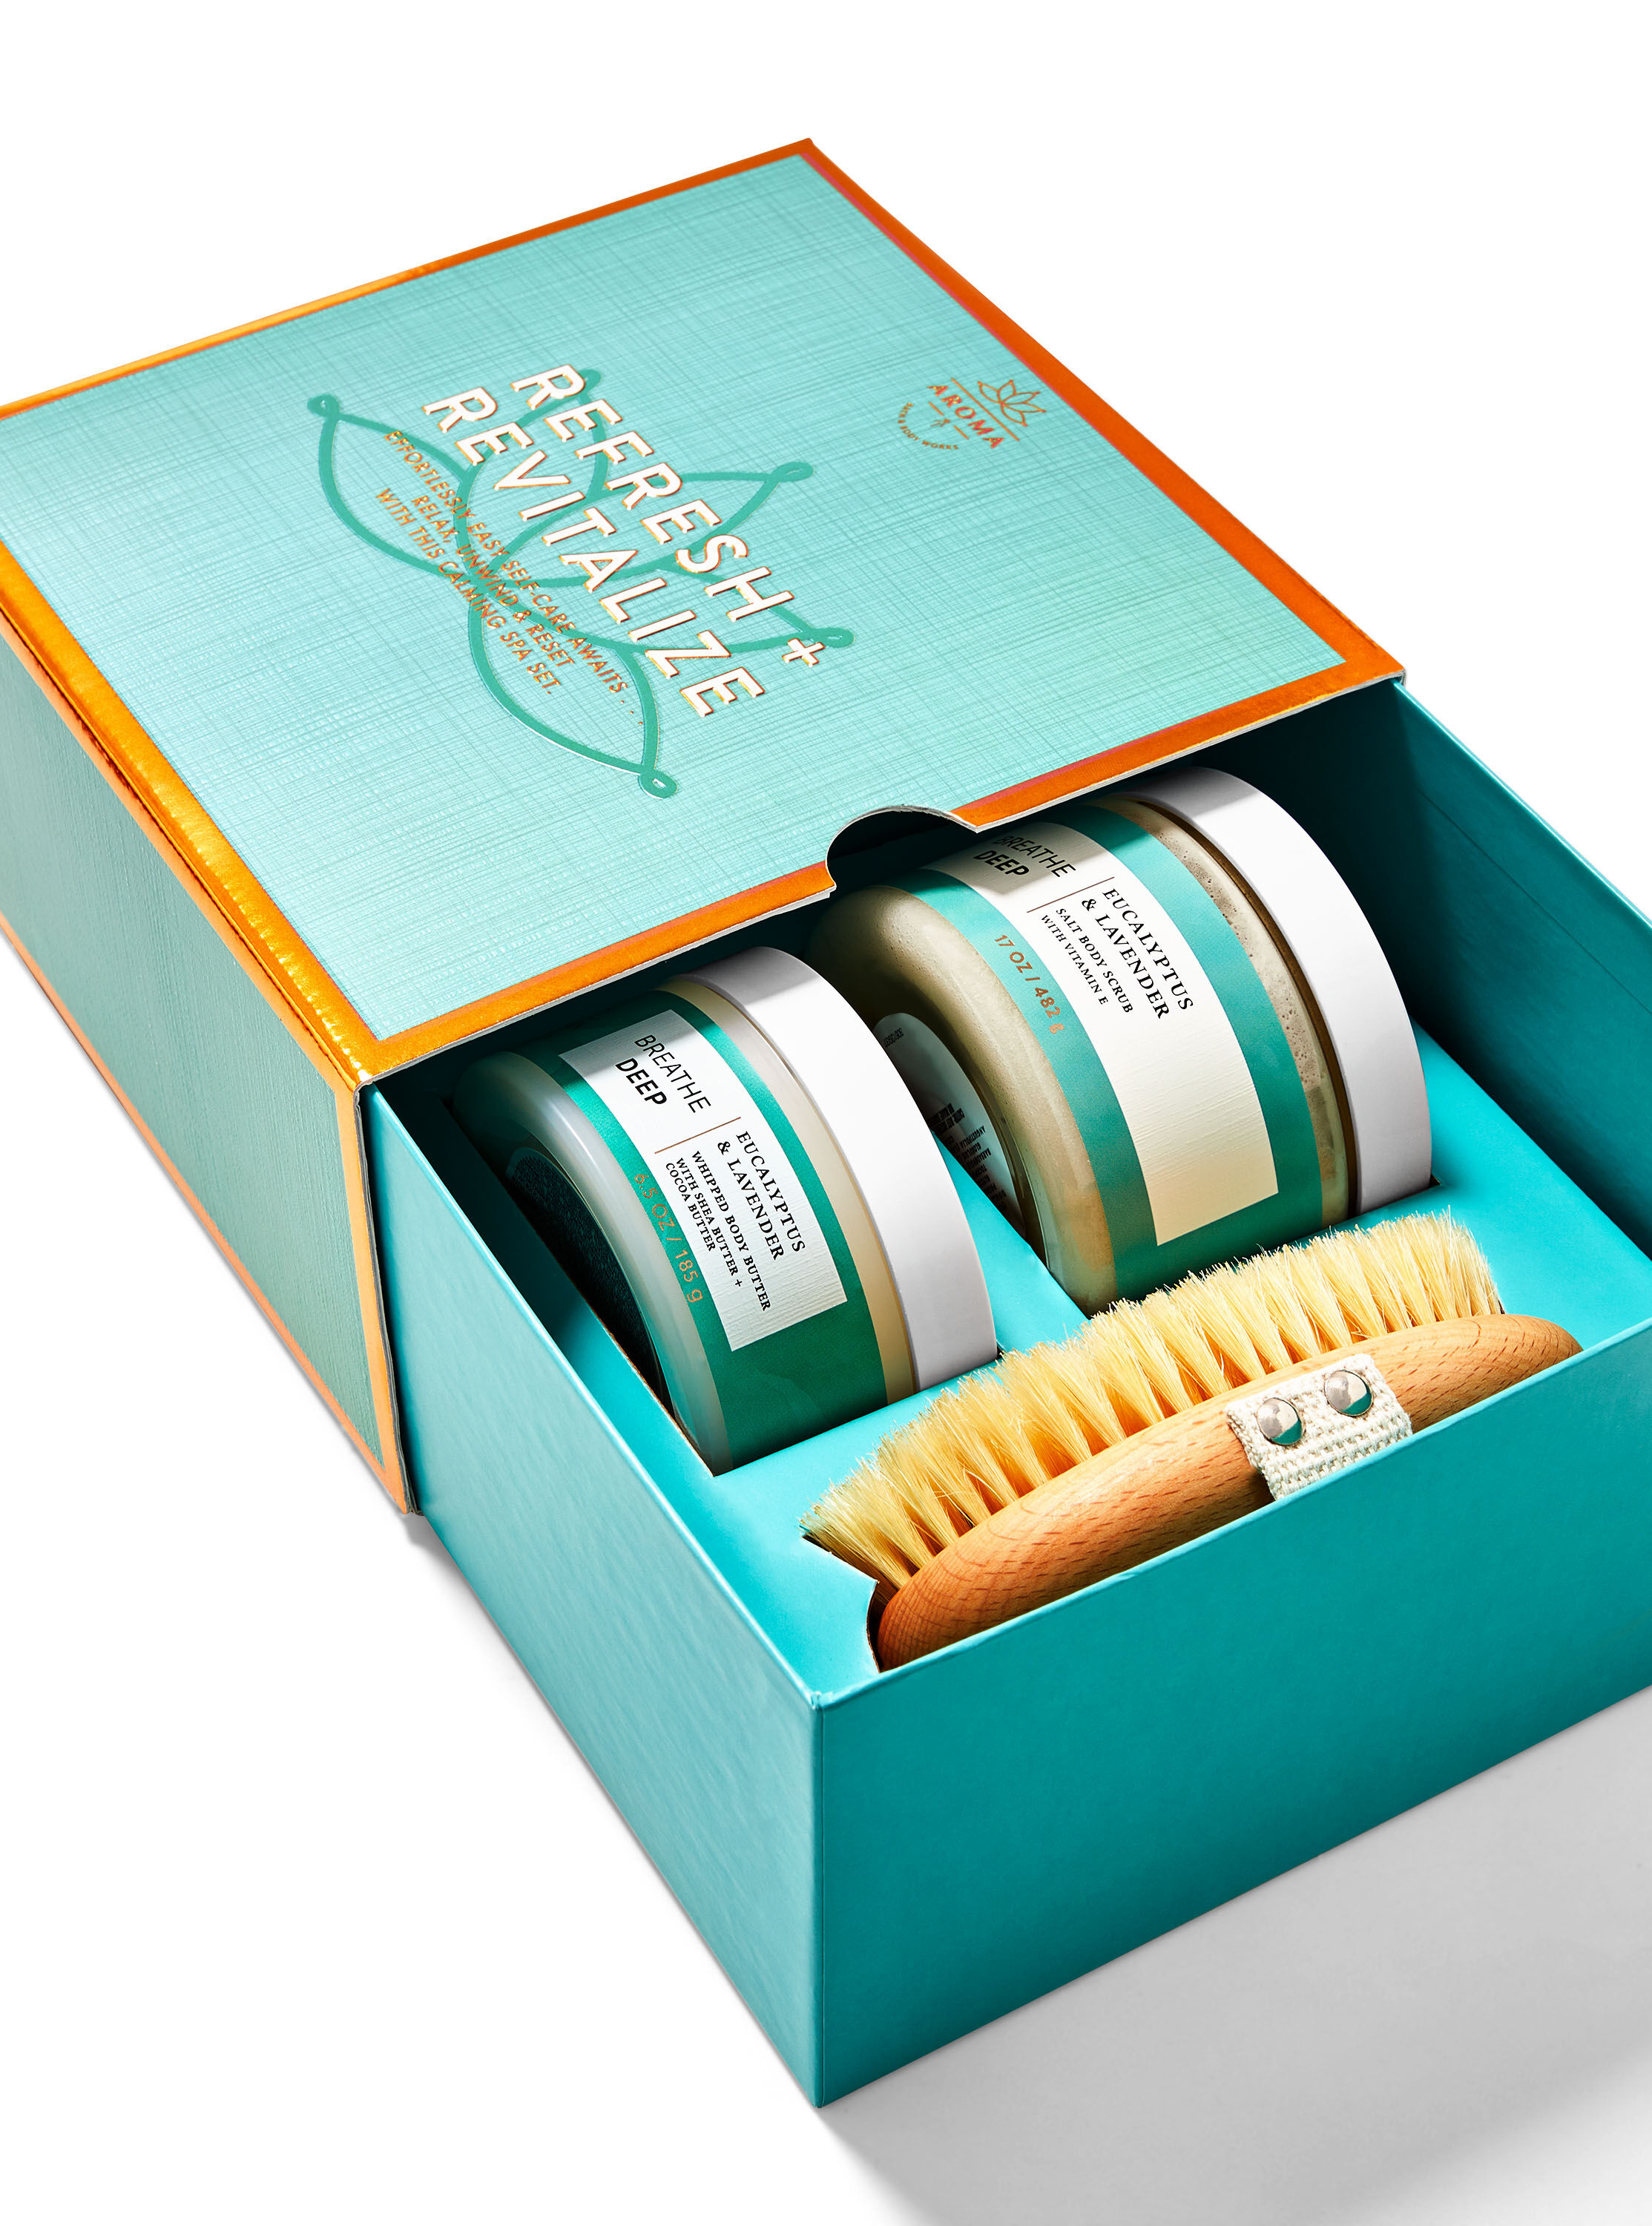 the gift set